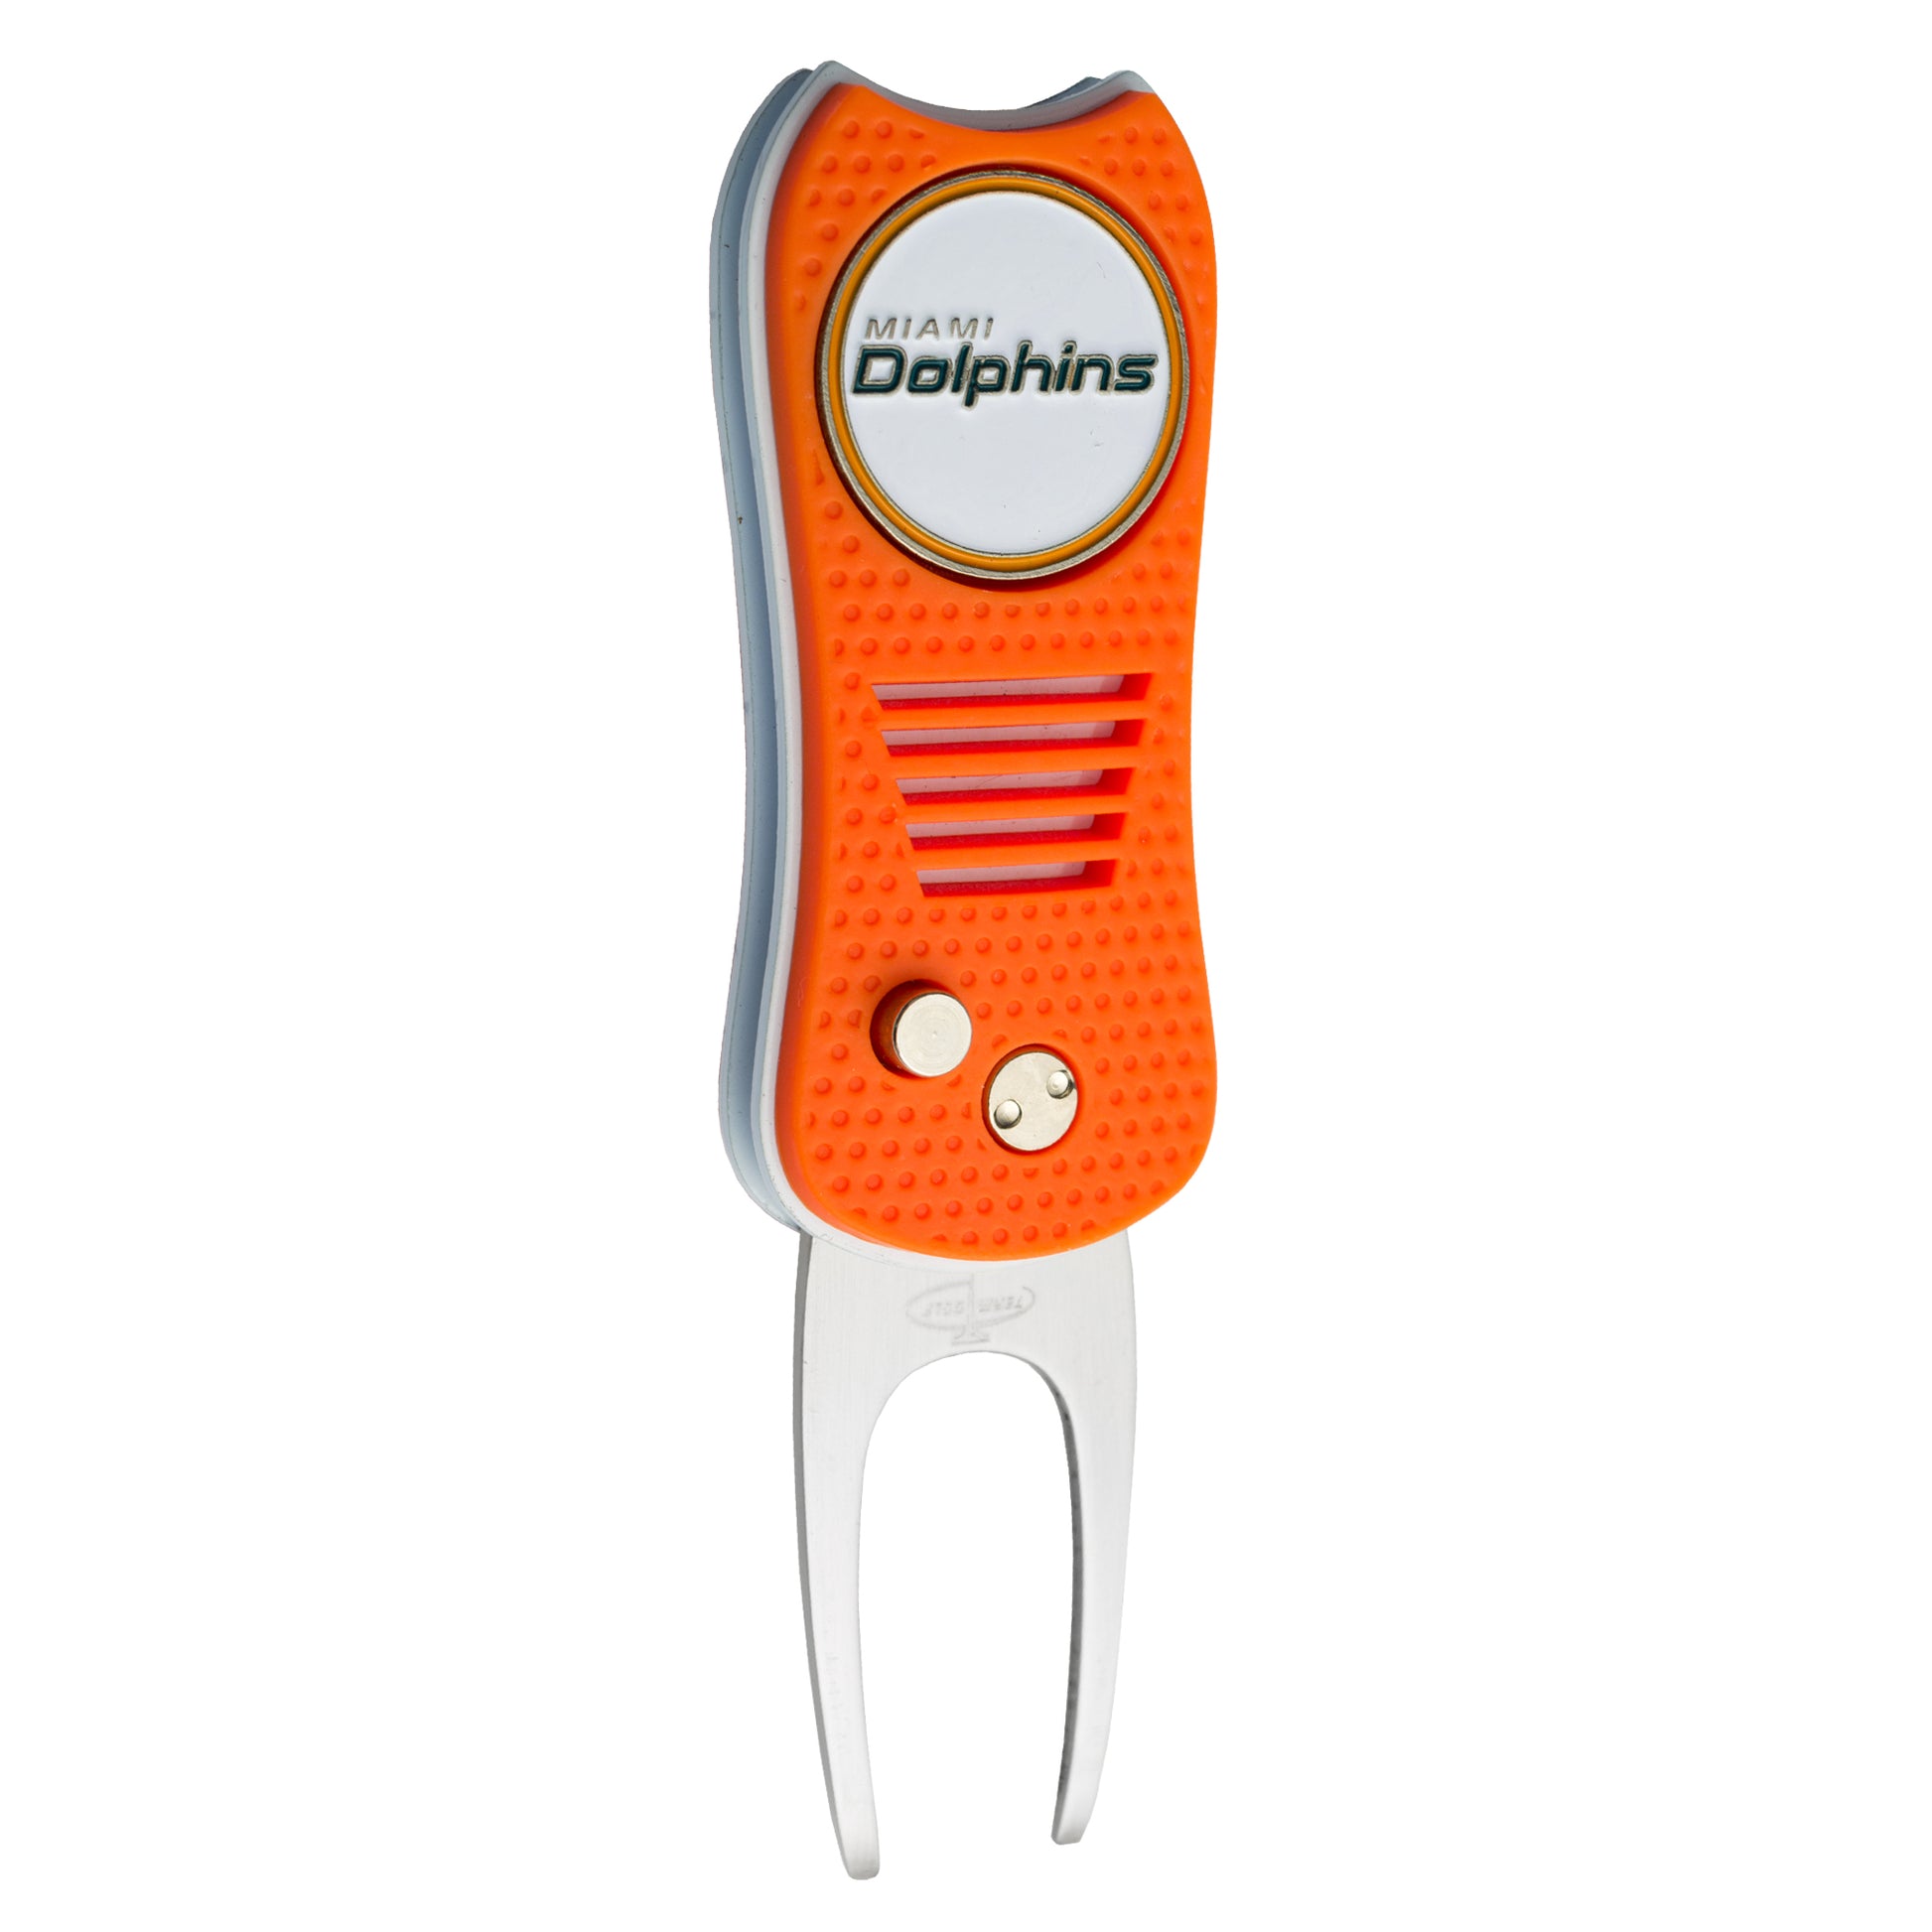 NFL Switchblade Divot Repair Tool (Miami Dolphins)